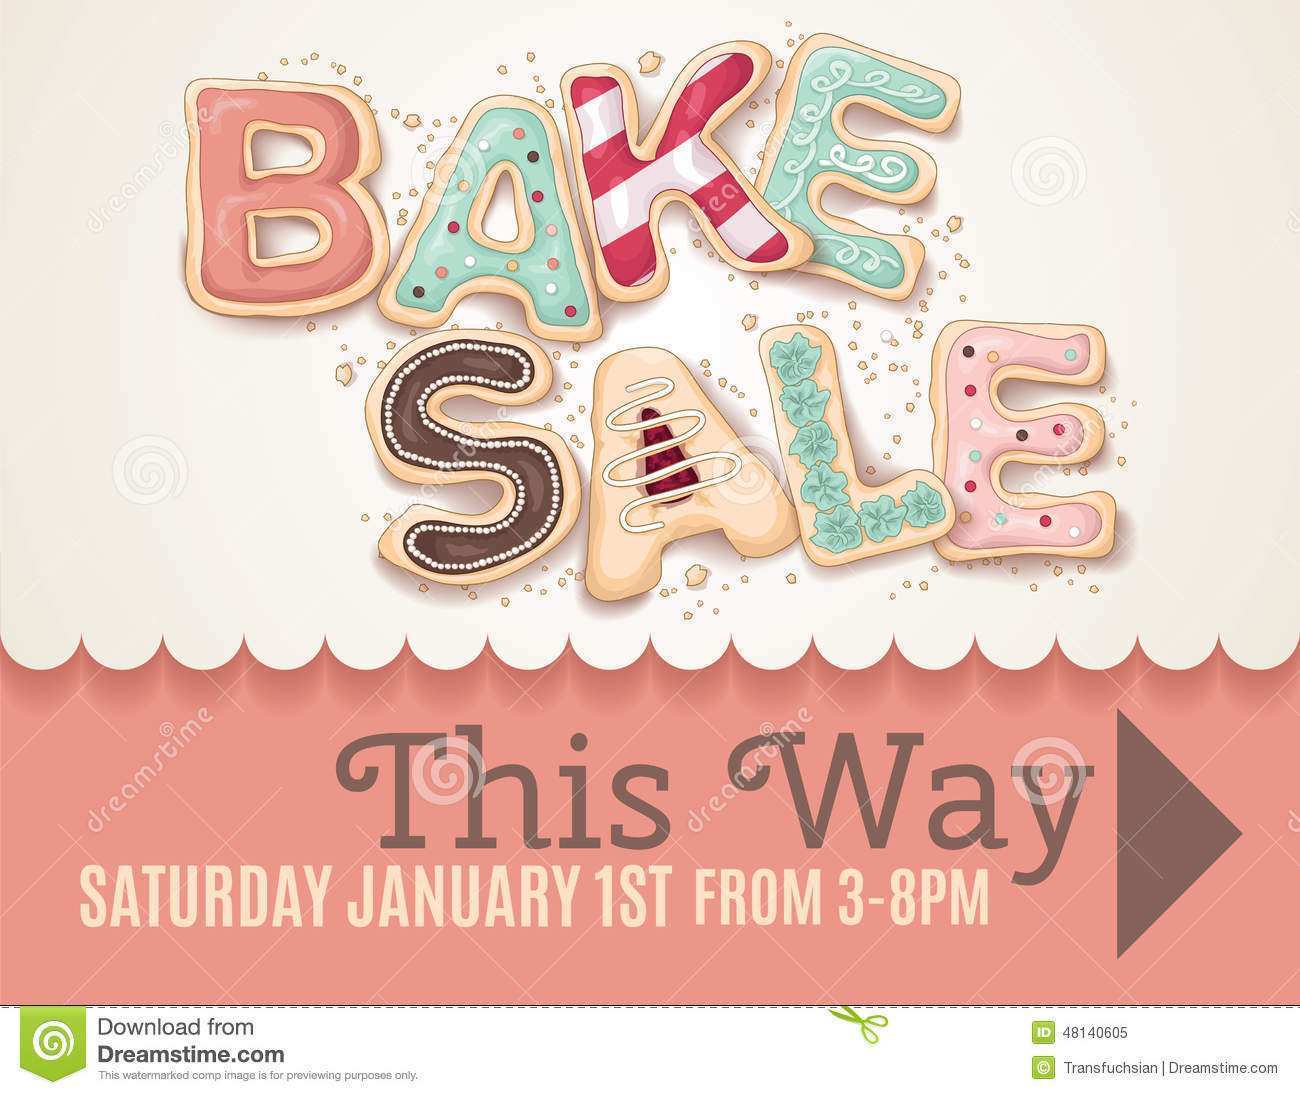 Free Bake Sale Template from legaldbol.com